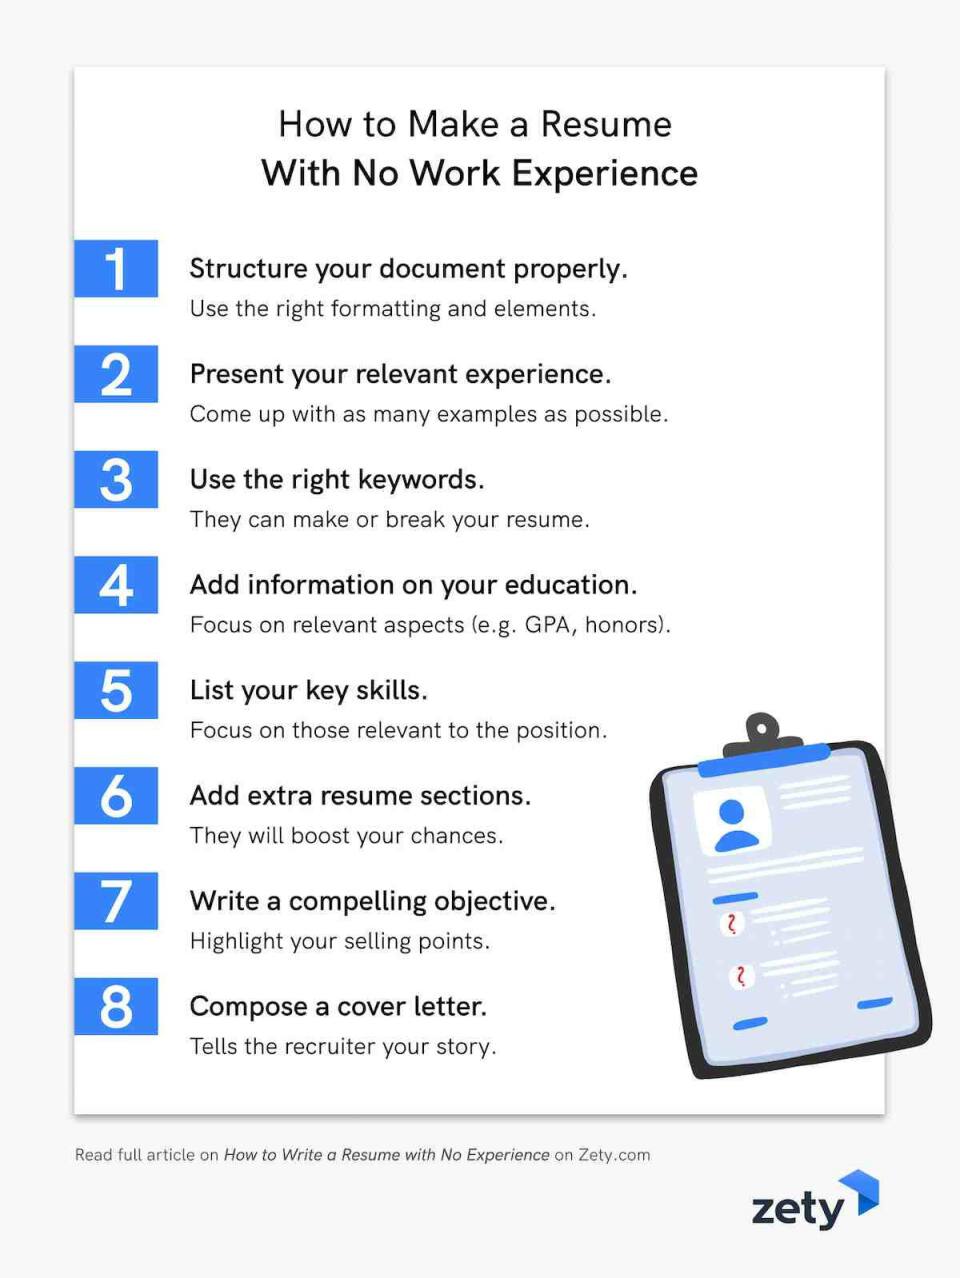 how to make a resume with no work experience in 8 steps